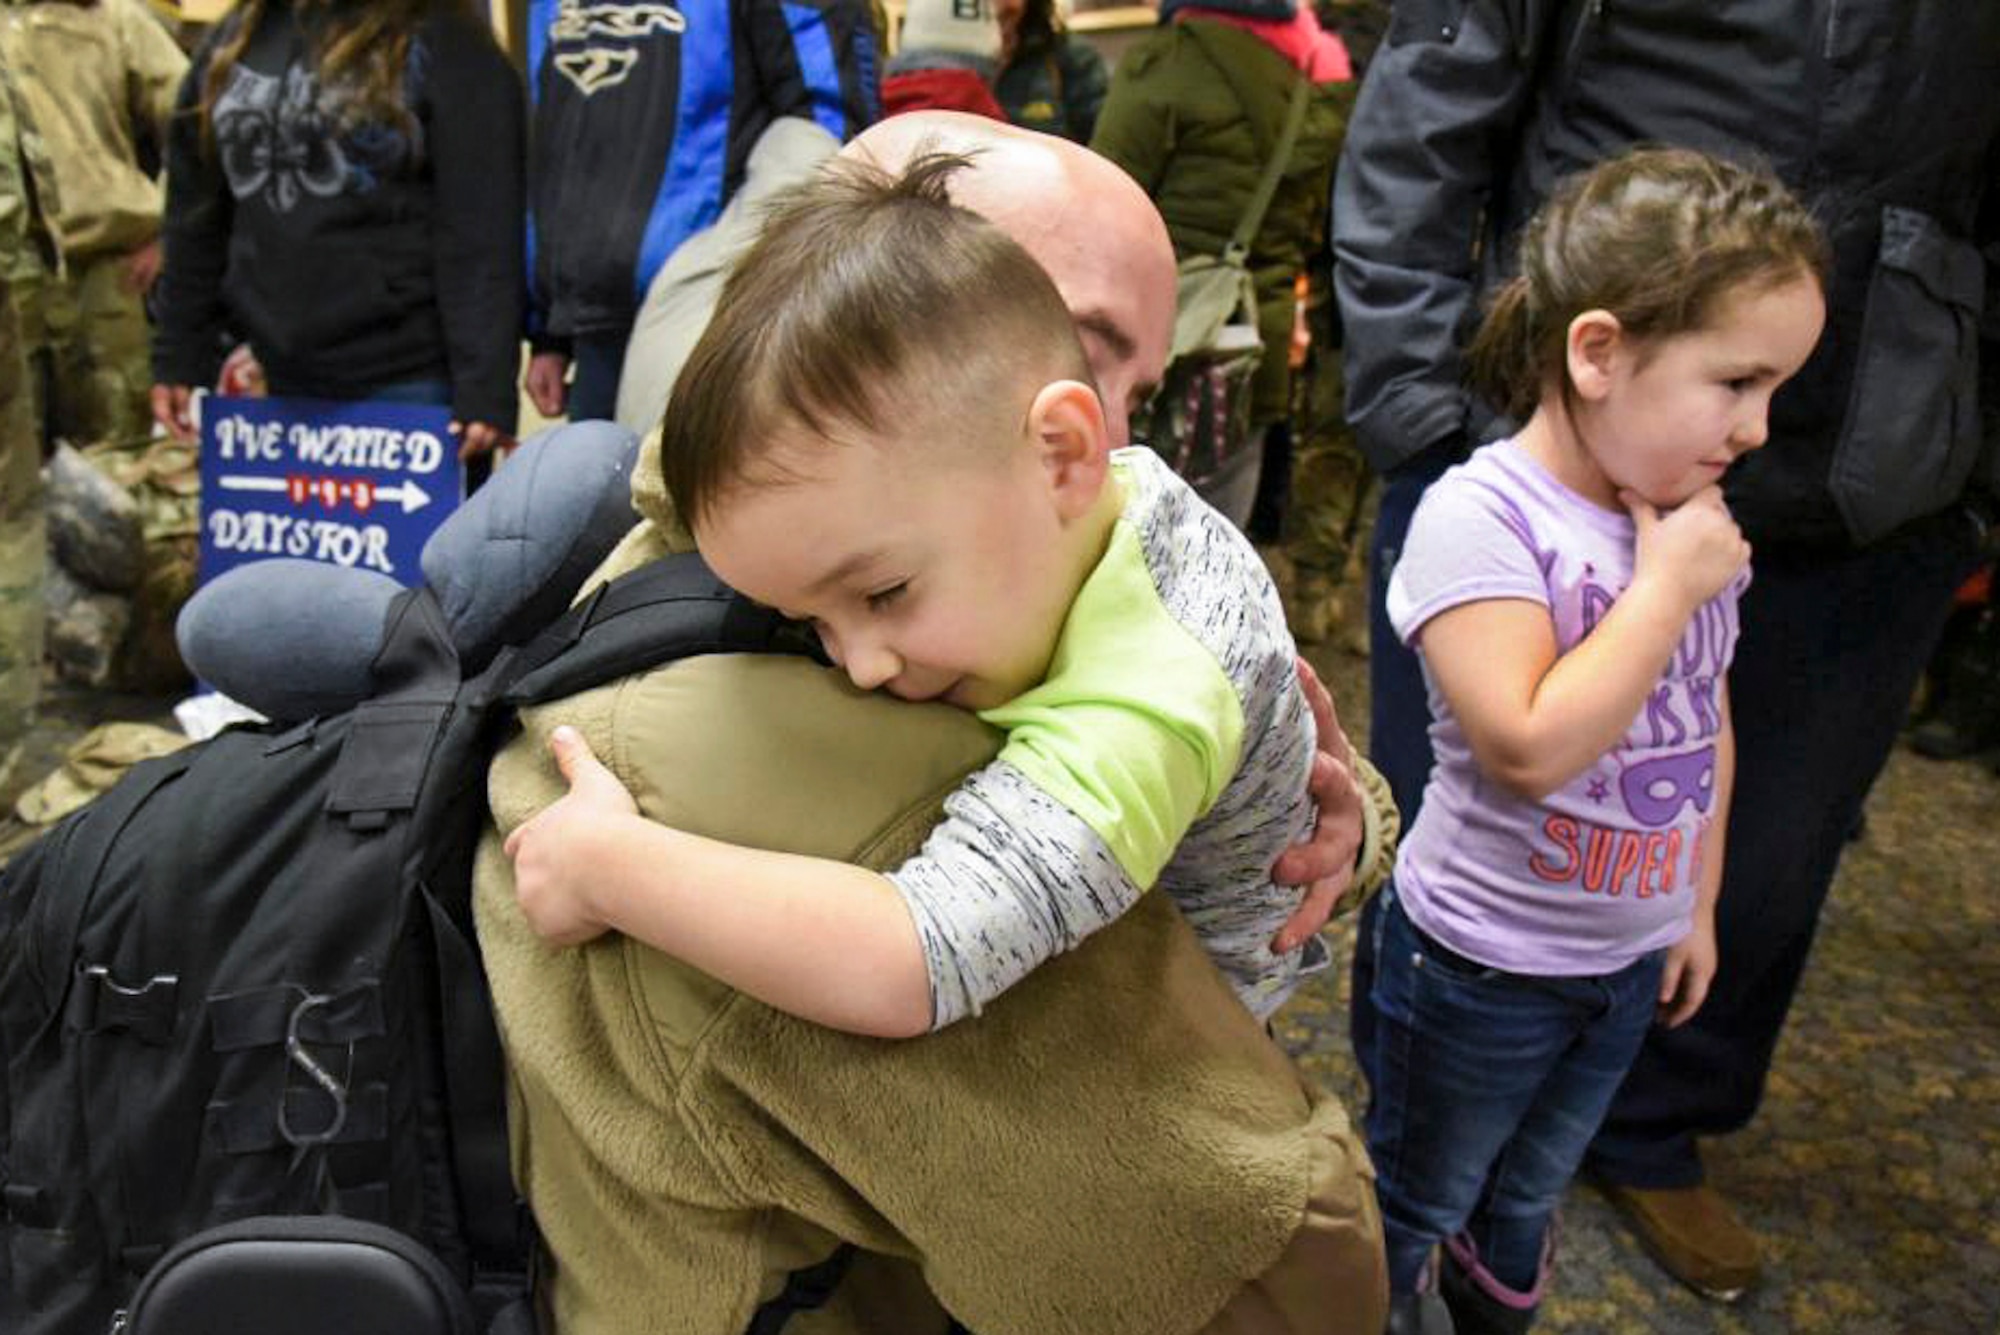 Tech. Sgt. Matthew Clark, assigned to the 119th Civil Engineer Squadron, hugs his son after 193 days apart upon completion of a six-month deployment to Southwest Asia, as he arrives at the North Dakota Air National Guard Base, Fargo, N.D., Jan. 15, 2018. (U.S. Air National Guard photo by Senior Master Sgt. David H. Lipp)